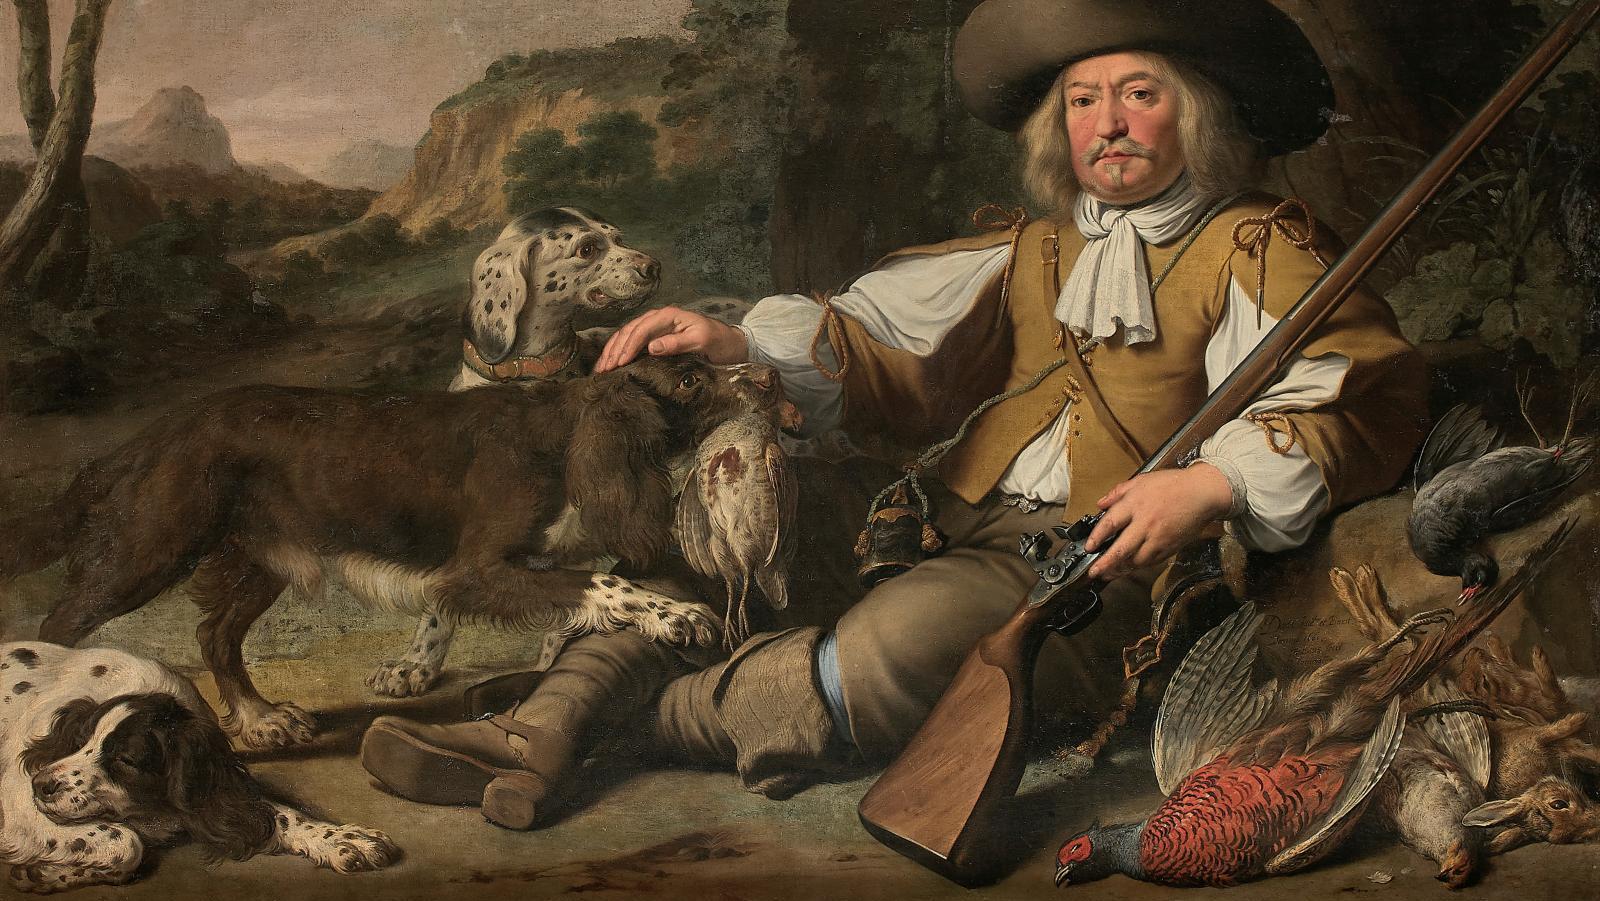 Jean Daret (1614-1668) and Nicasius Bernaerts (1620-1678), Portrait de chasseur assis... The First French Portrait of a Hunter?